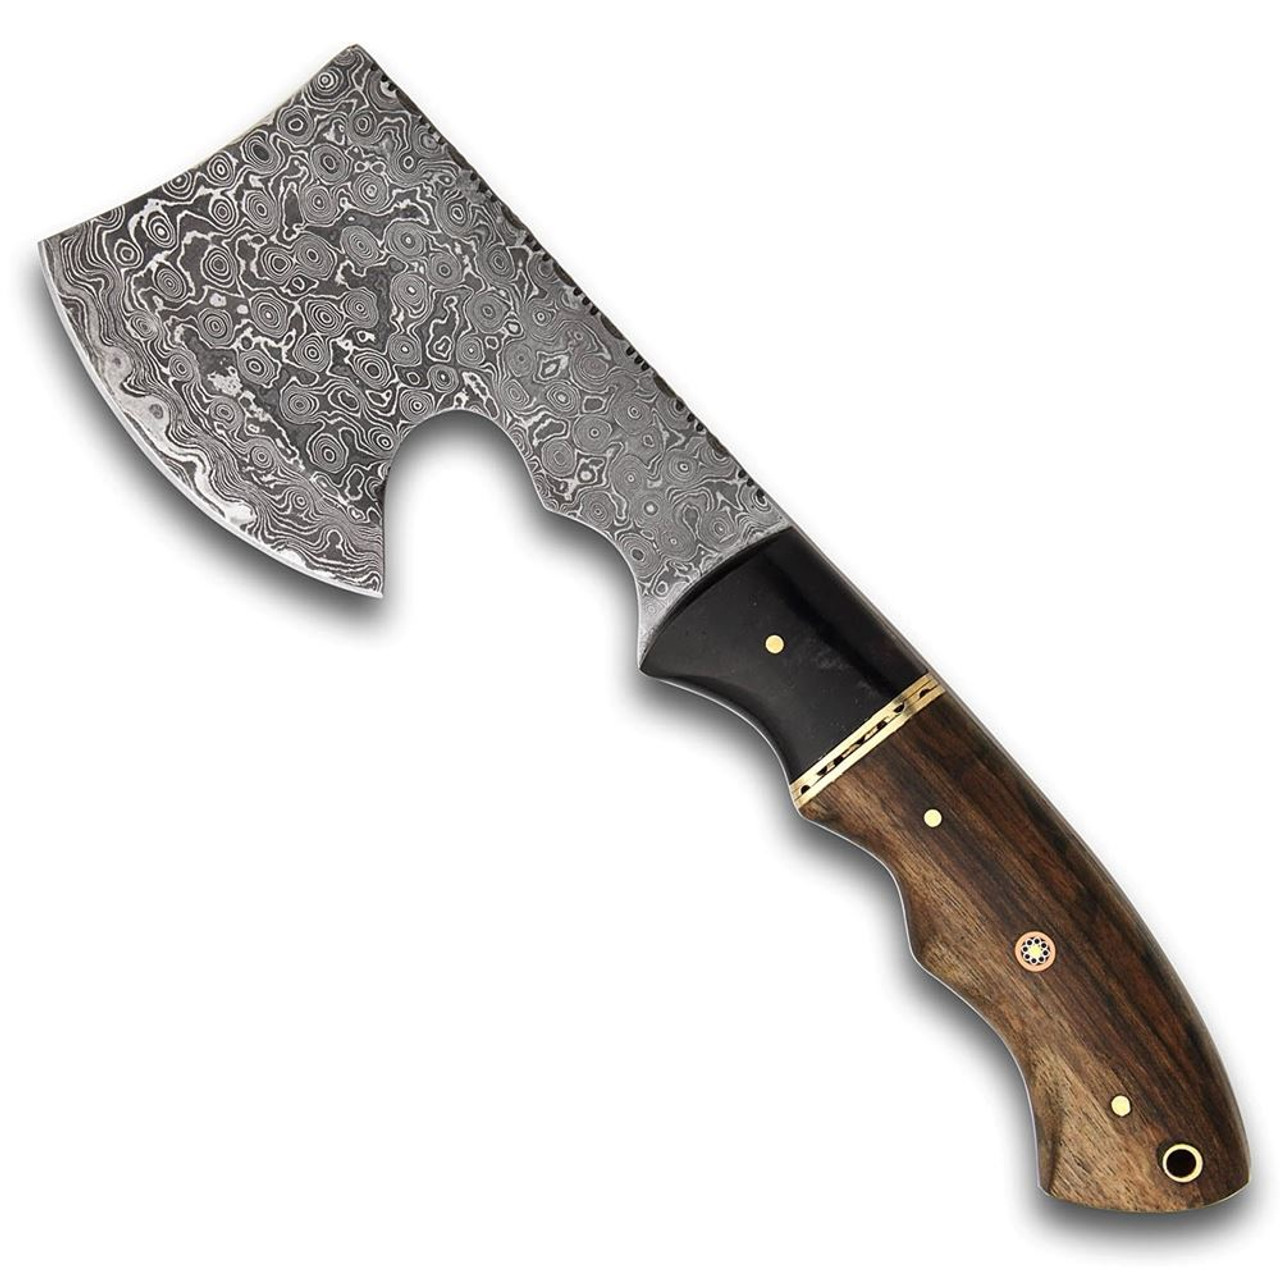 https://cdn11.bigcommerce.com/s-fy9rv139a5/images/stencil/1280x1280/products/9664/22078/0007634_damascus-hand-axe__46840.1702987897.jpg?c=1